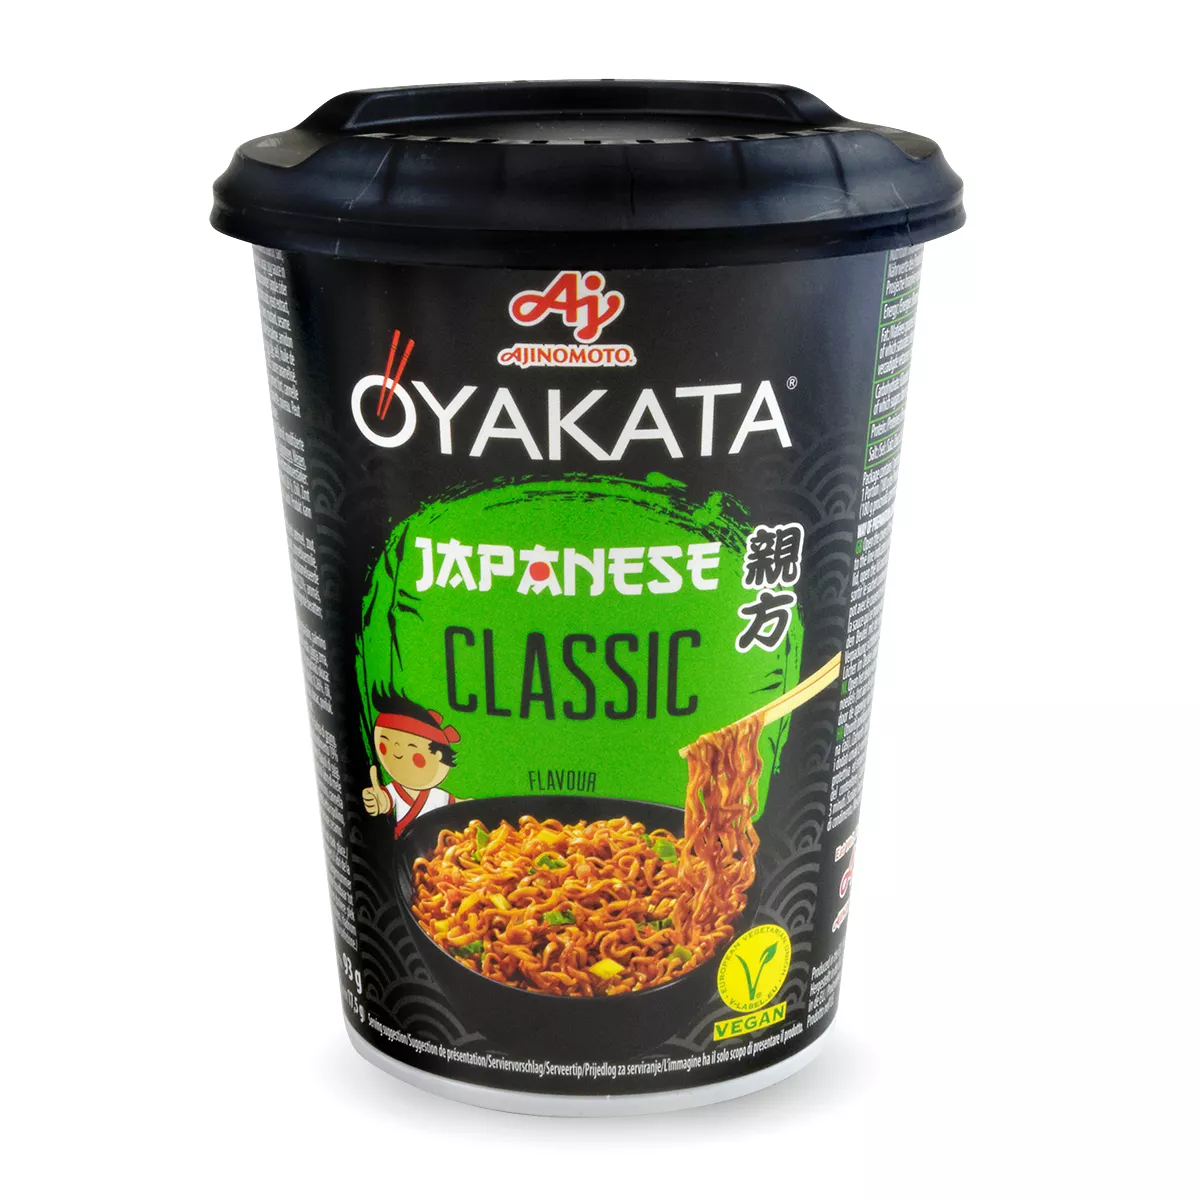 Taitei instant Classic Flavour CUP OYAKATA 93g, [],asianfood.ro